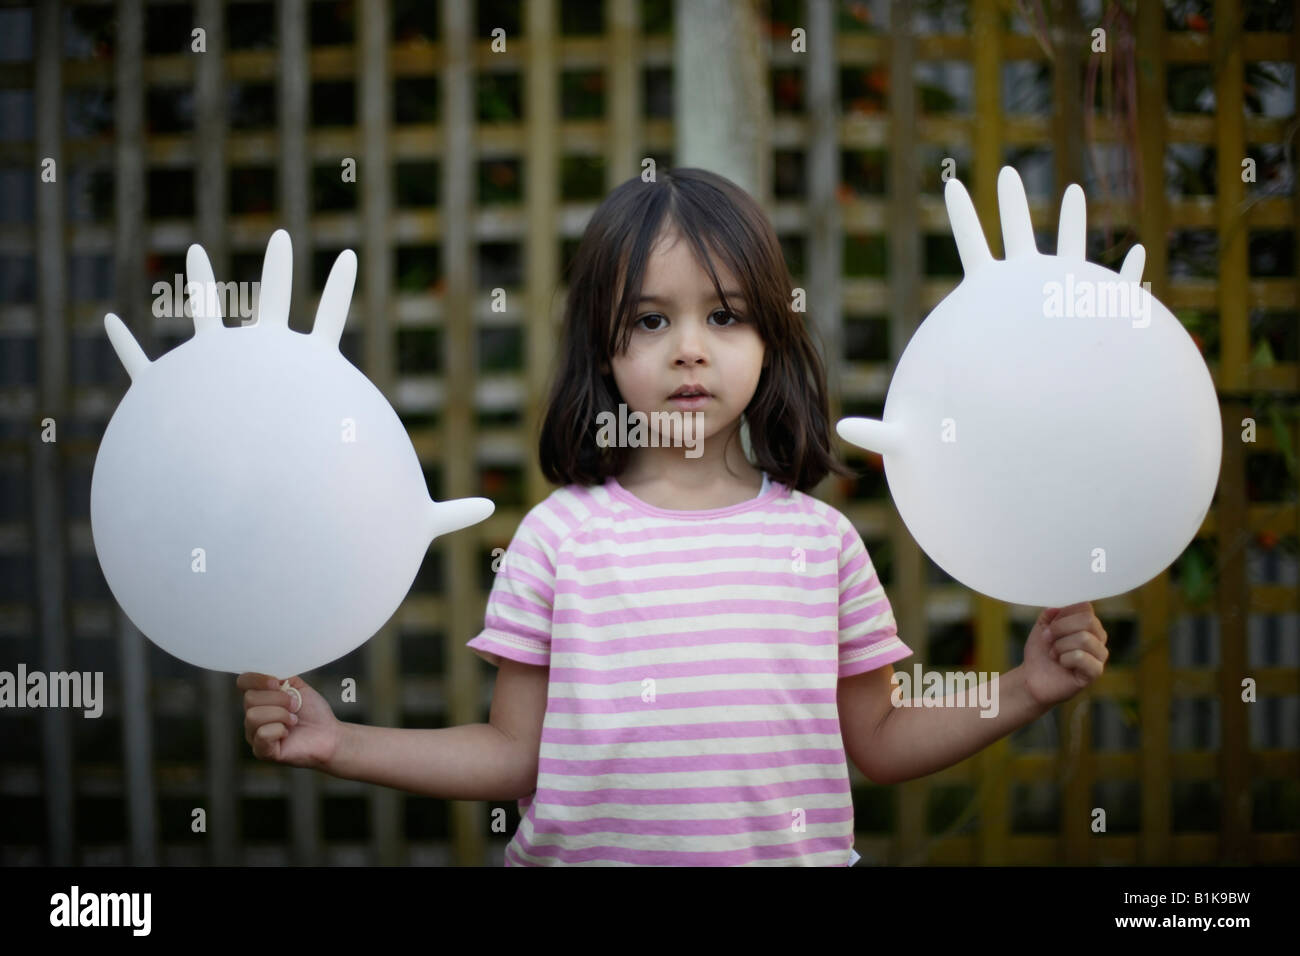 Girl aged four holds two inflated latex rubber gloves and looks directly at camera Stock Photo